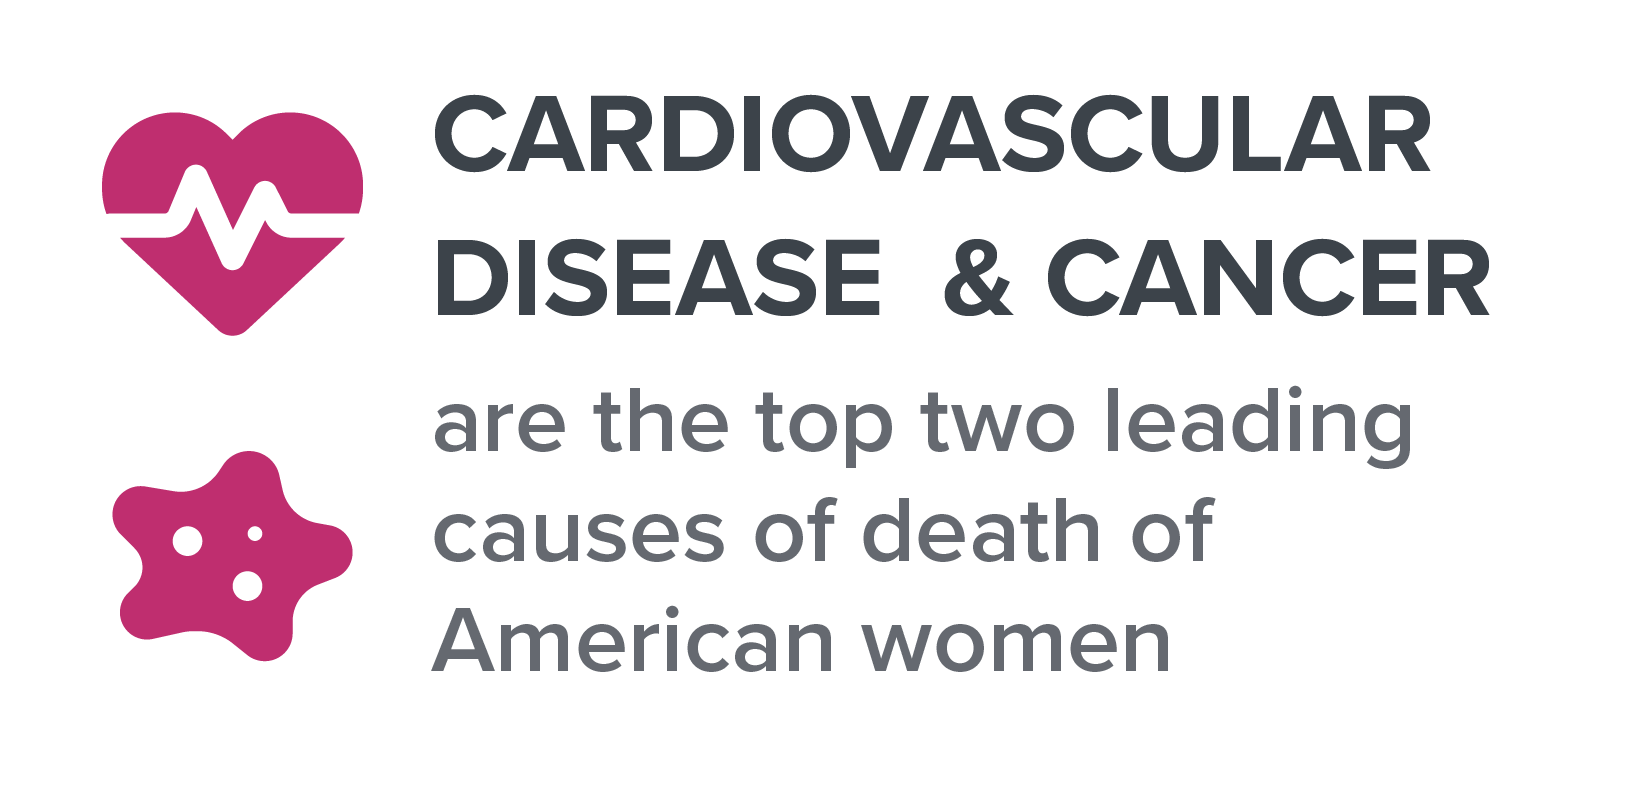 Cardiovascular disease and cancer are the top two leading causes of death of American women.